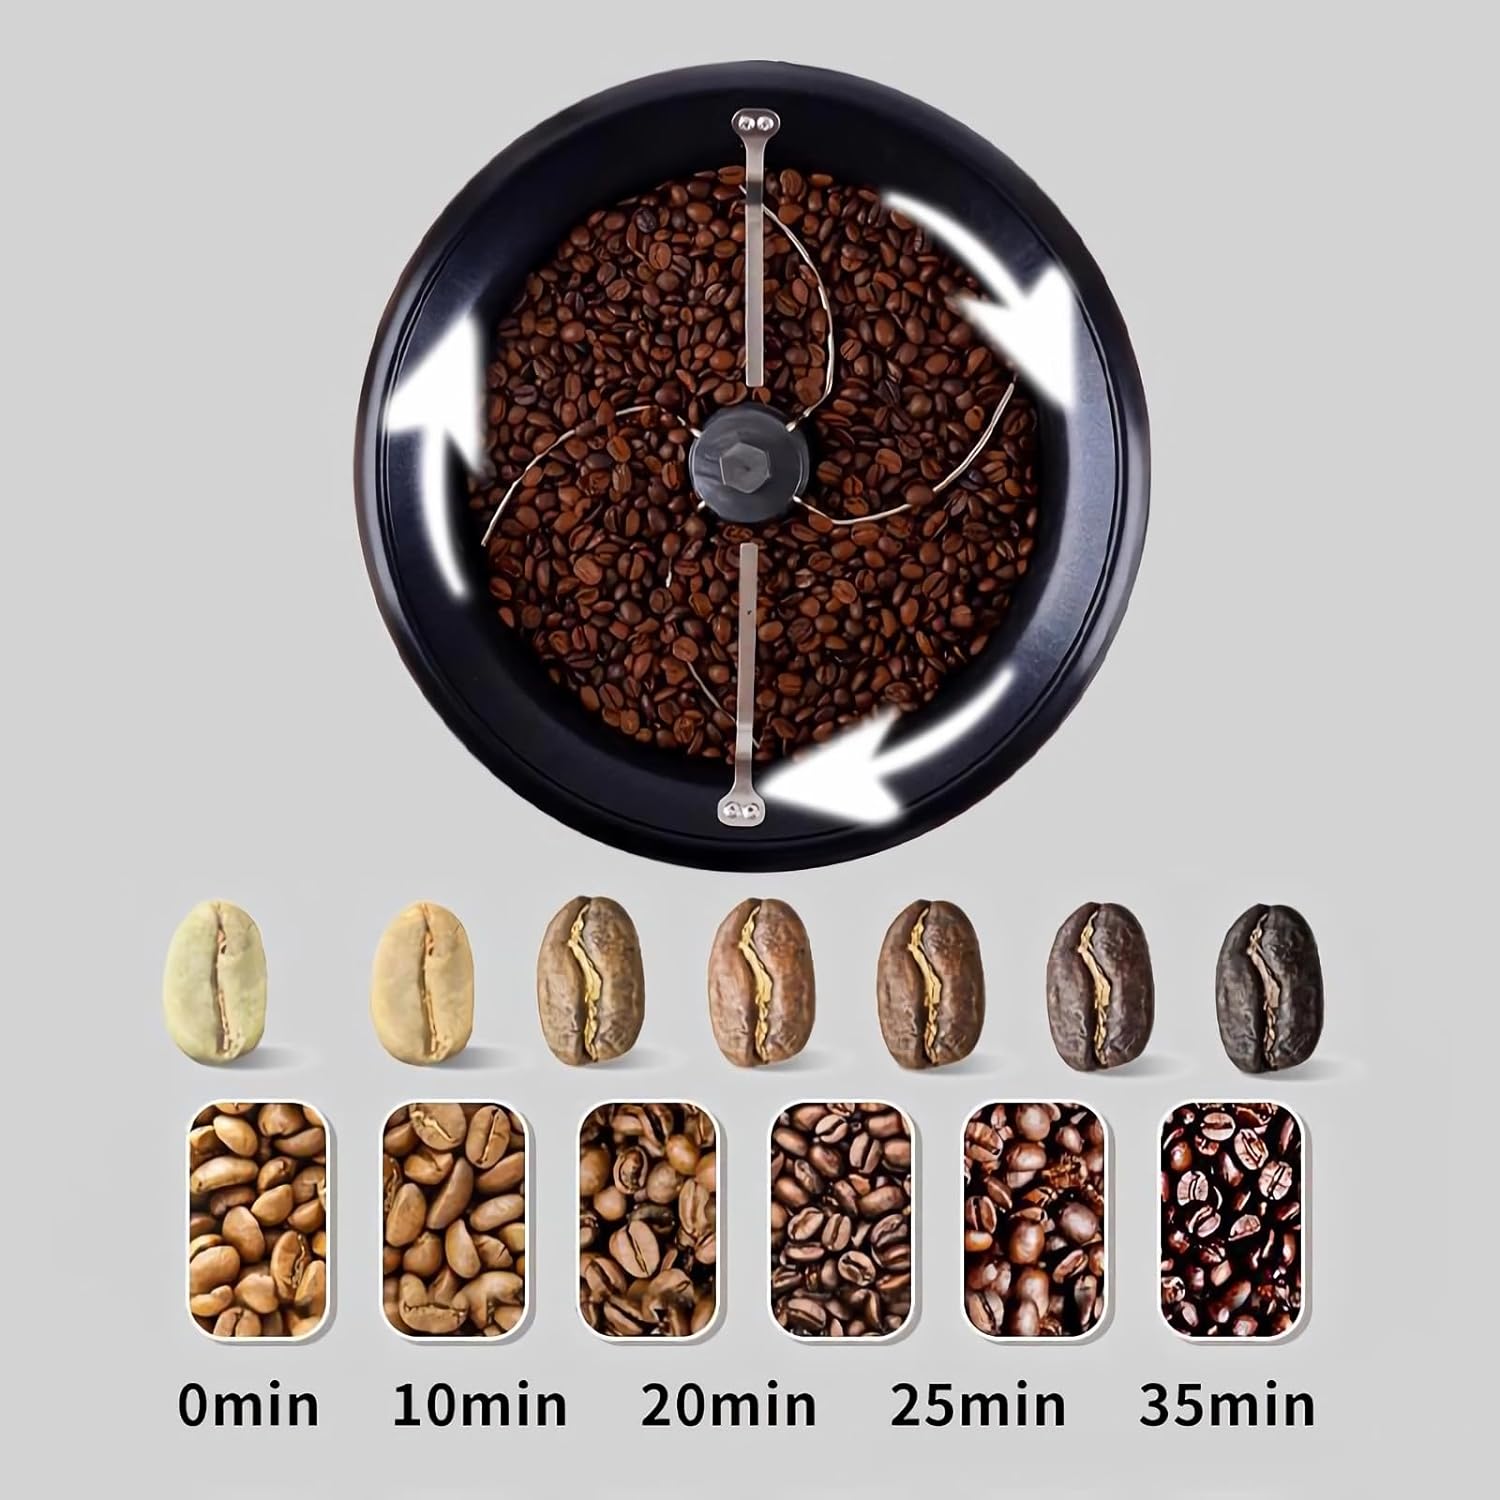 Winb Coffee Roaster Machine For Home Use, 110V Household Electric Coffee Bean Roaster With Timer Roasting Machine Peanut Bean Home Coffee Roaster